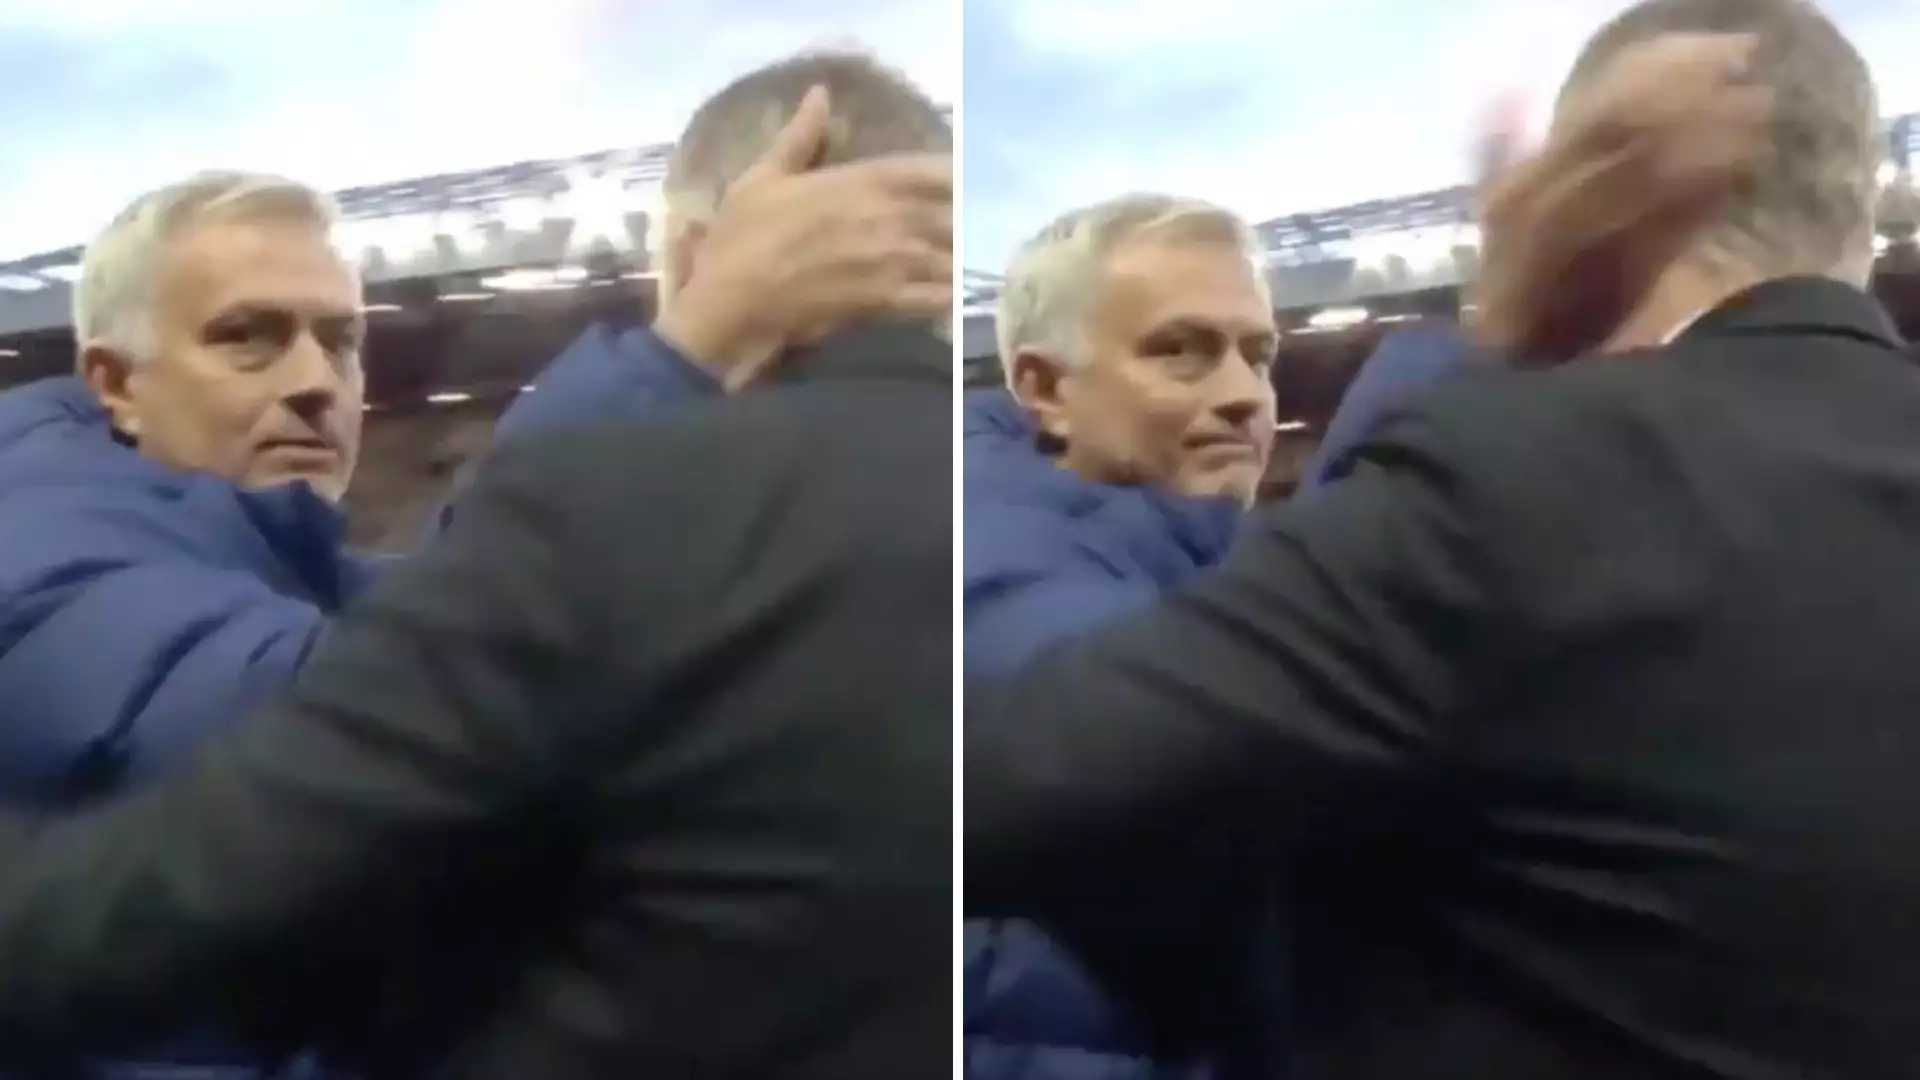 Fans Love Jose Mourinho Going 'Full S**thouse' And Patting Ole Gunnar Solskjaer On The Head